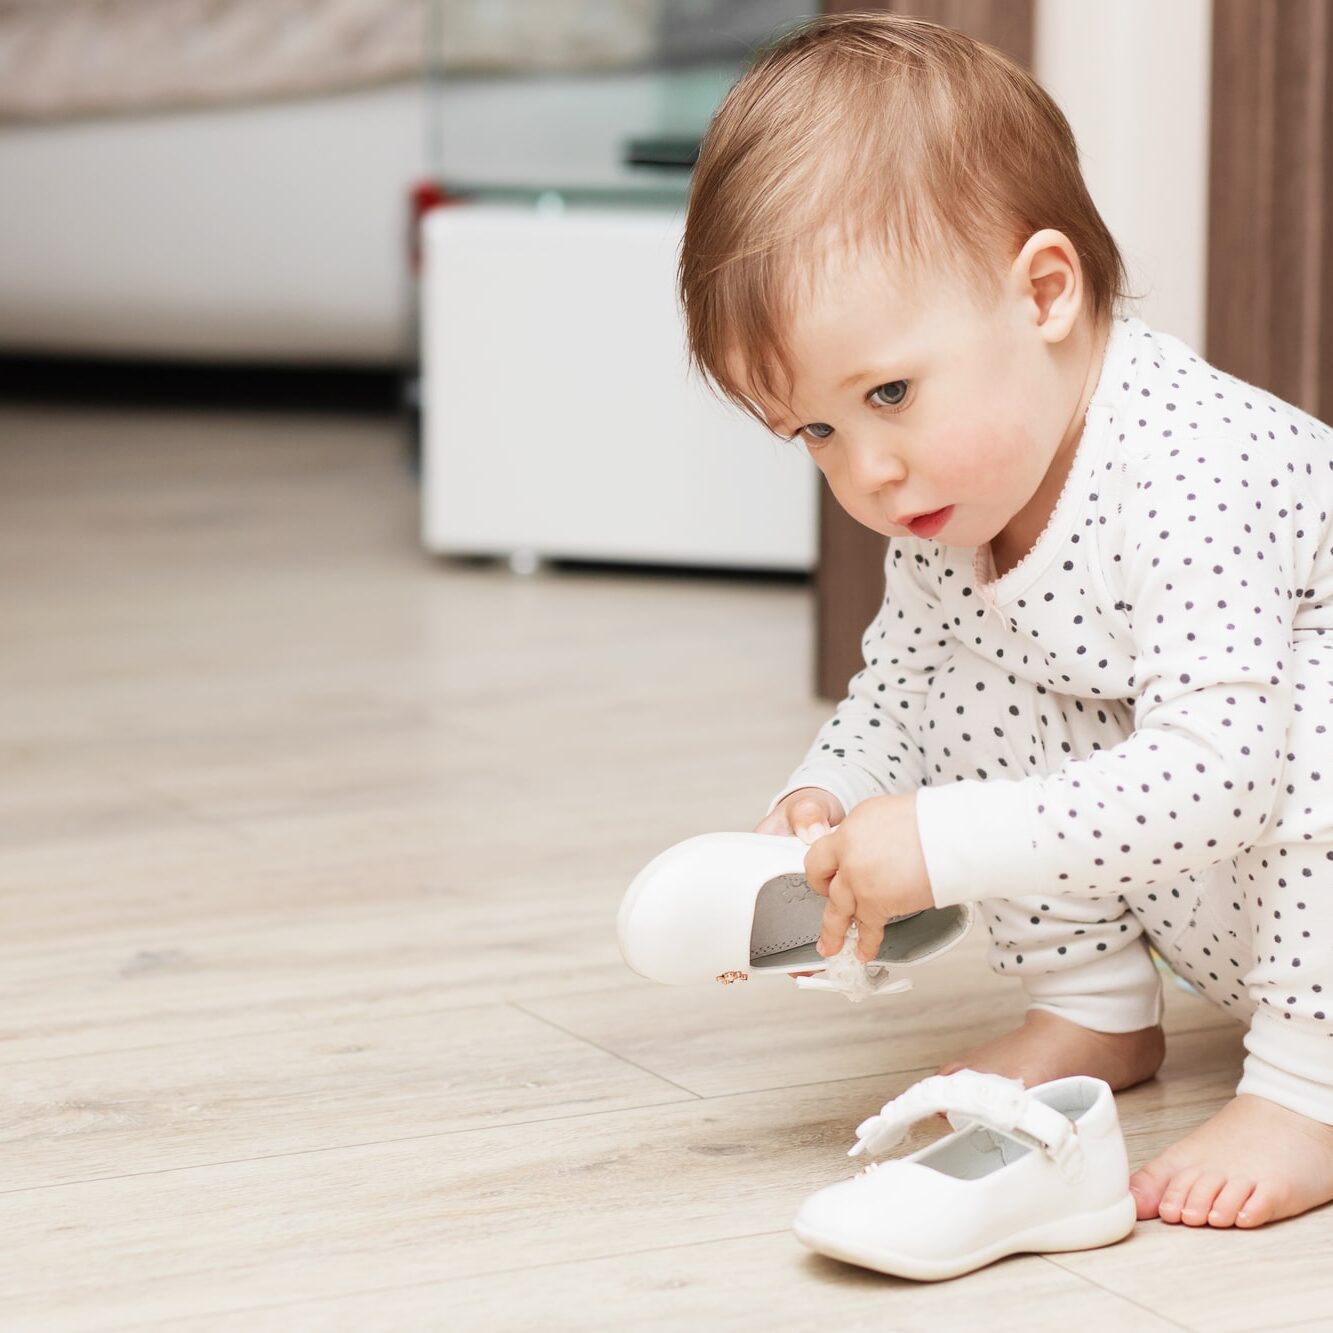 Cute baby girl in pajamas squatting on floor tries to put on her white shoes in the playroom